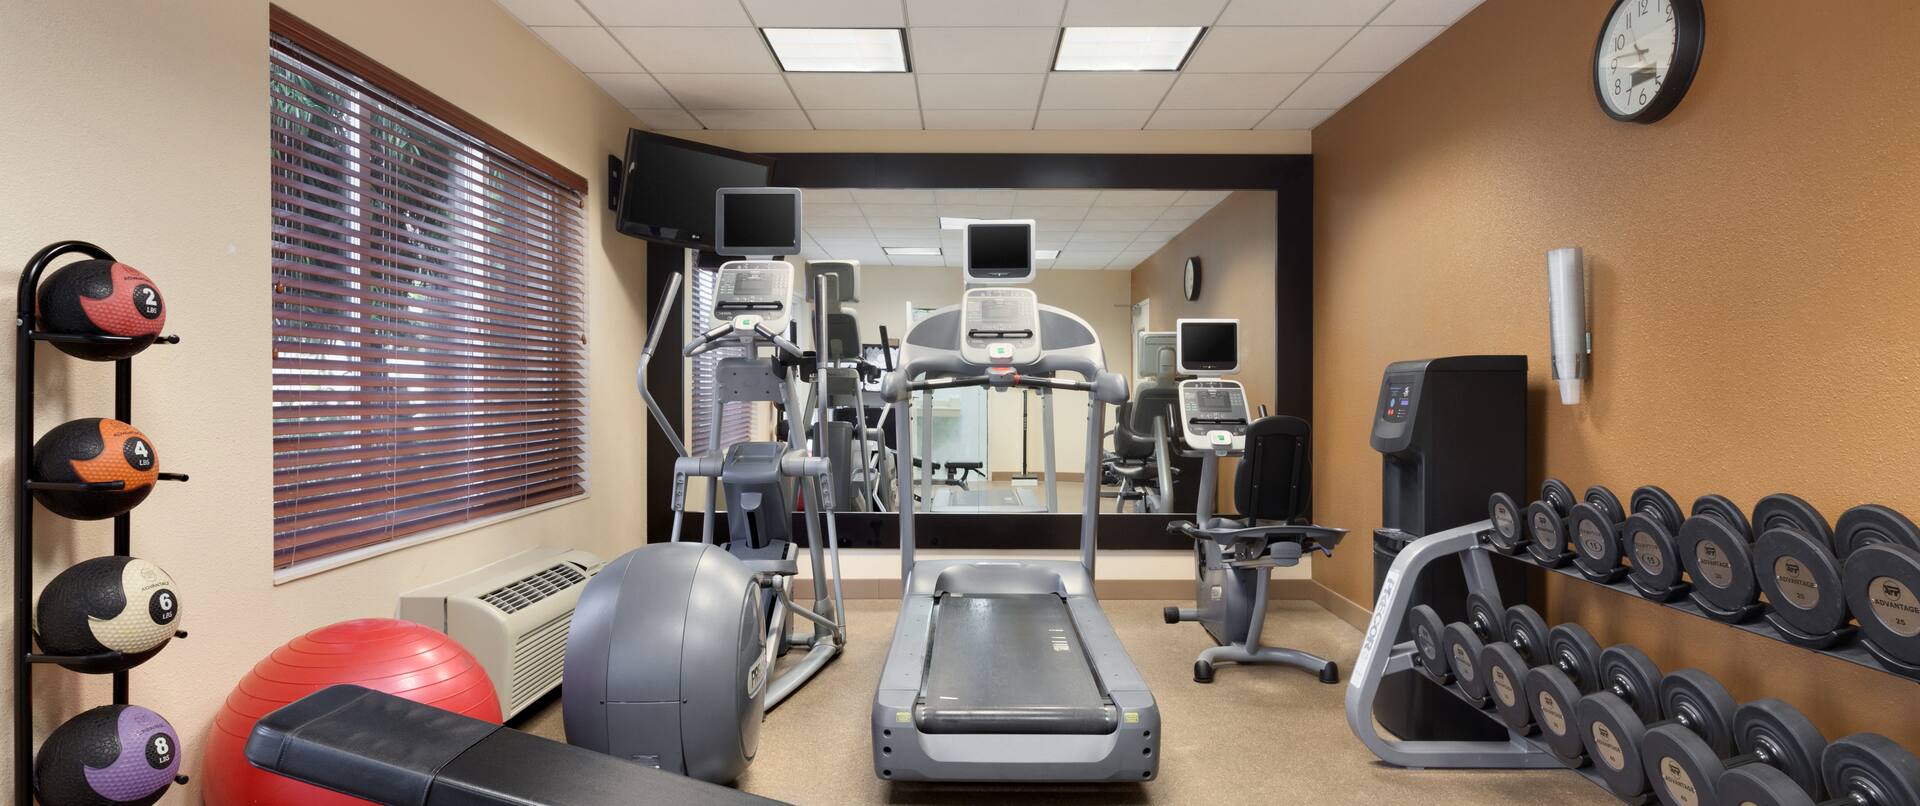 Fitness Center With Cardio Equipment, TV, Mirrored Wall, Water Cooler, Free Weights, Weight Bench, Weight Balls, and Red Stability Ball